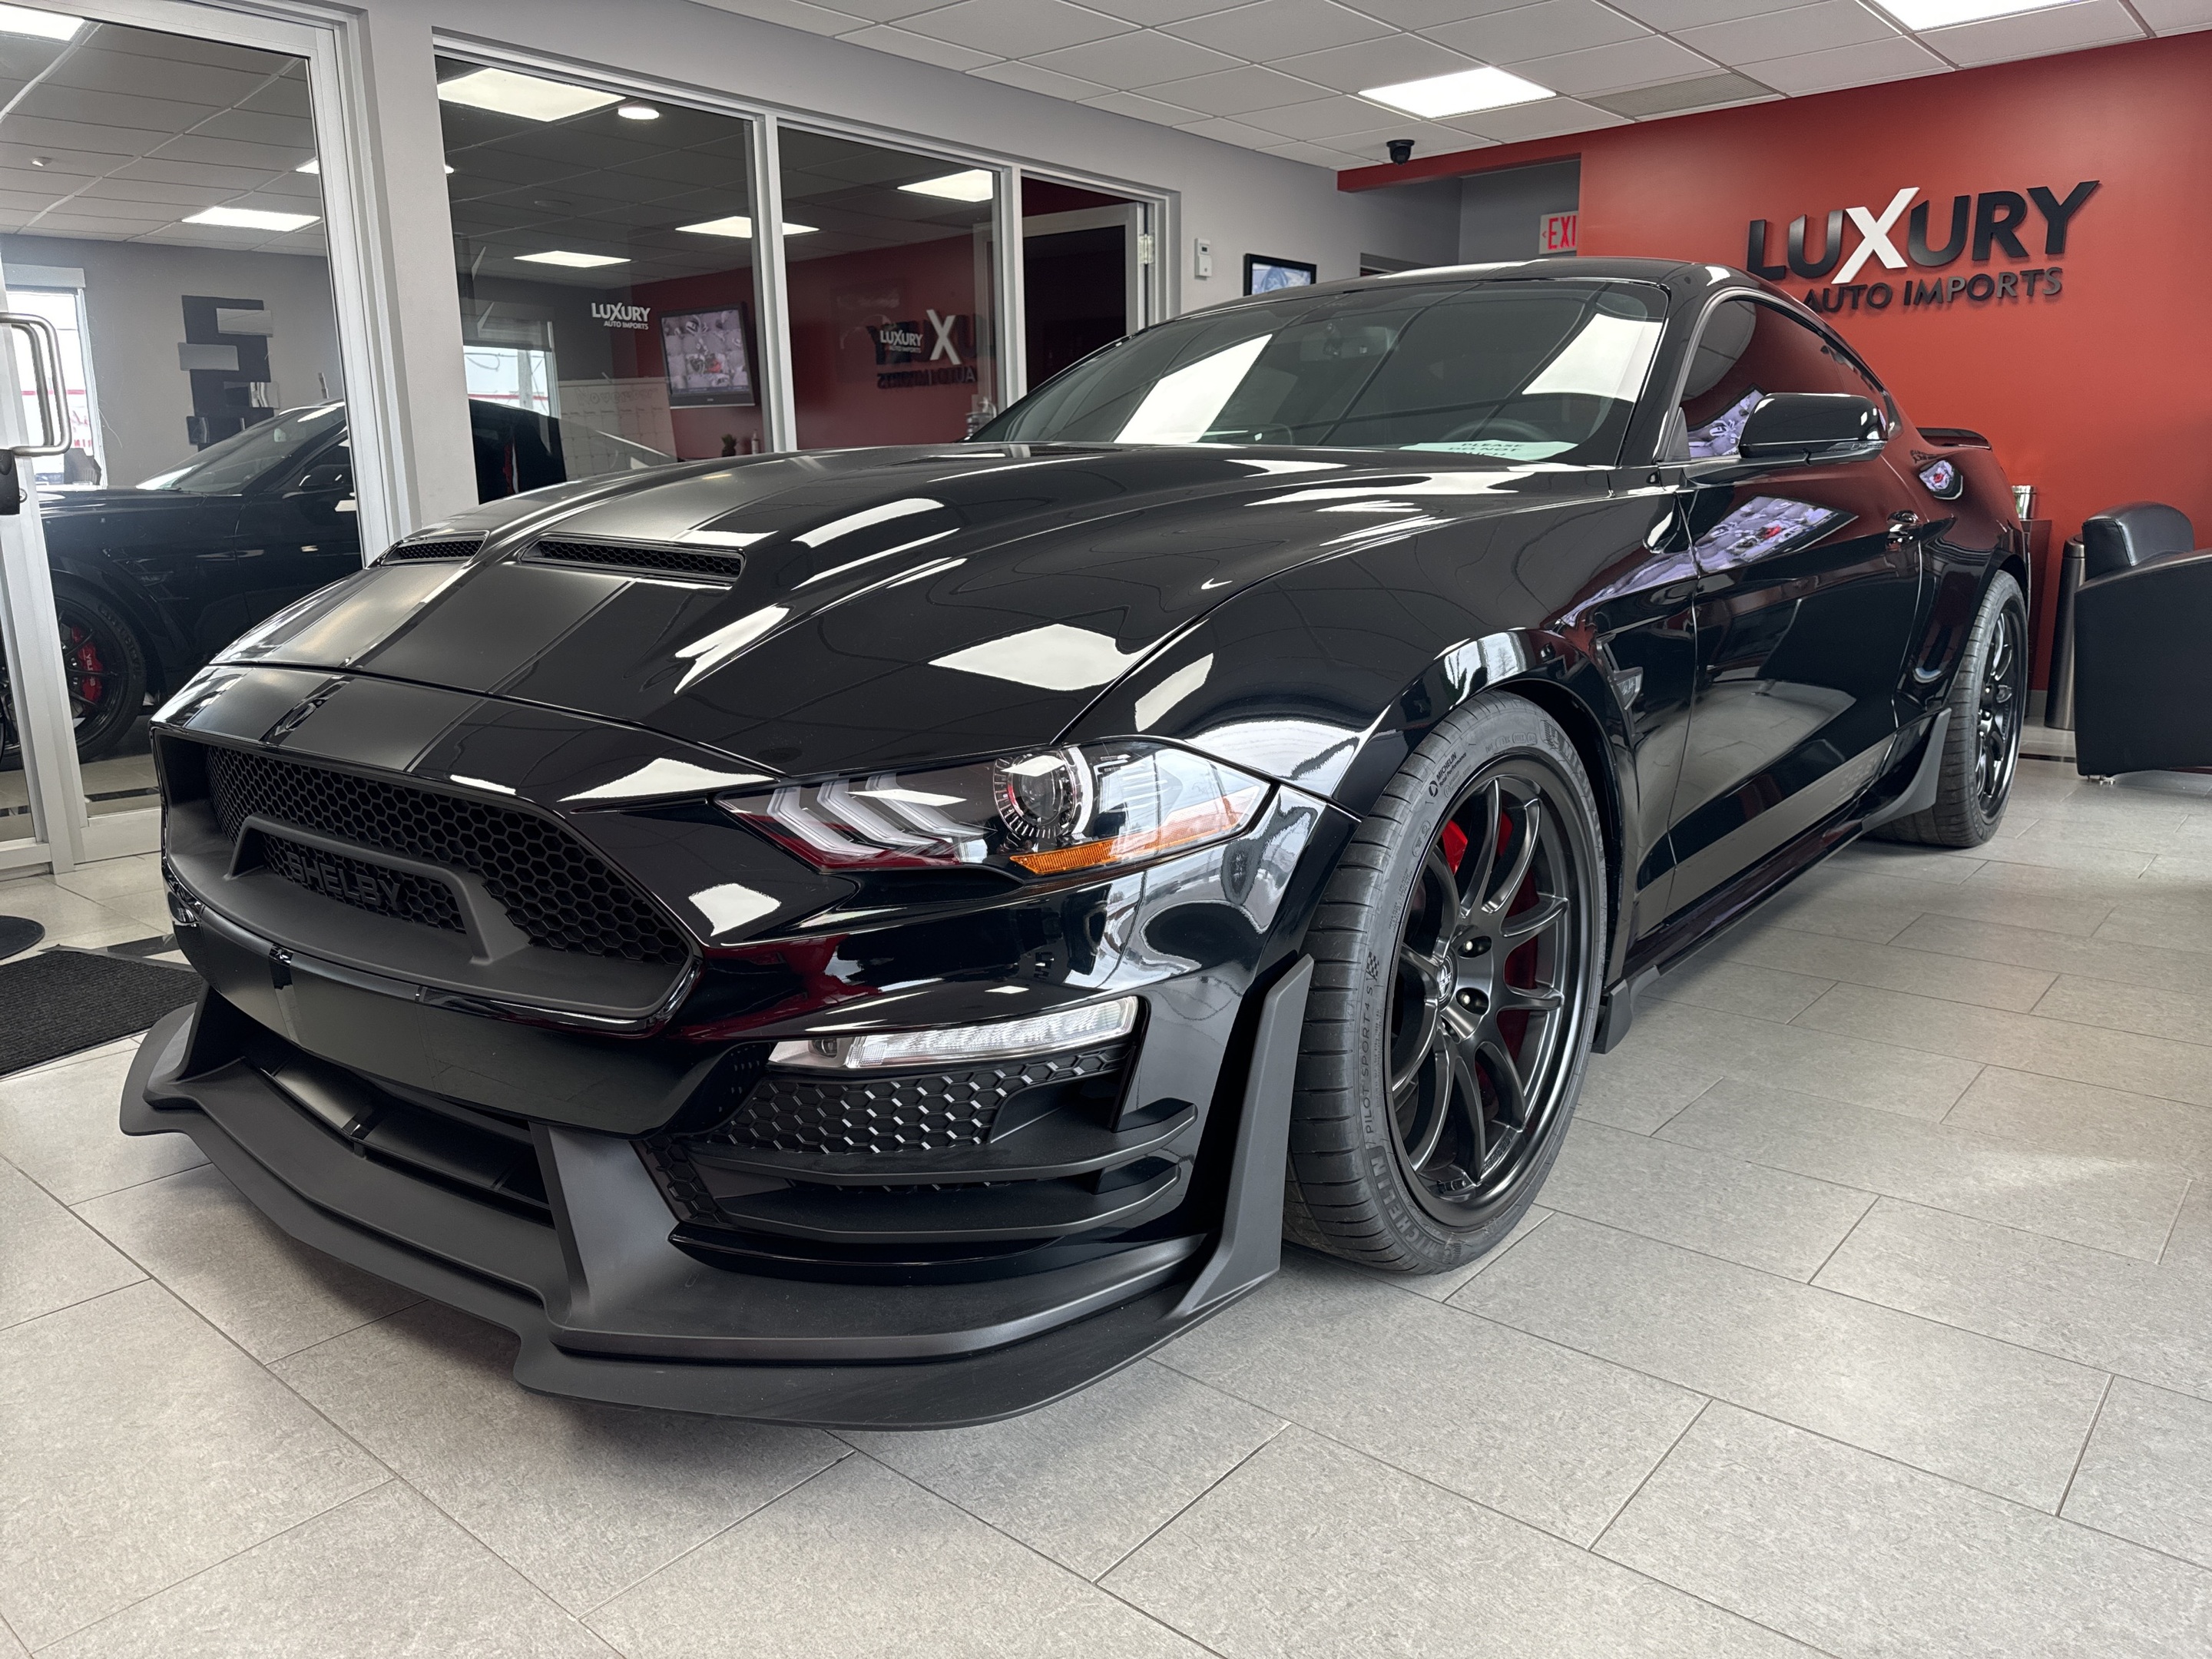 2020 Ford Mustang Carrroll Shelby Signature edition- 1of 3 made